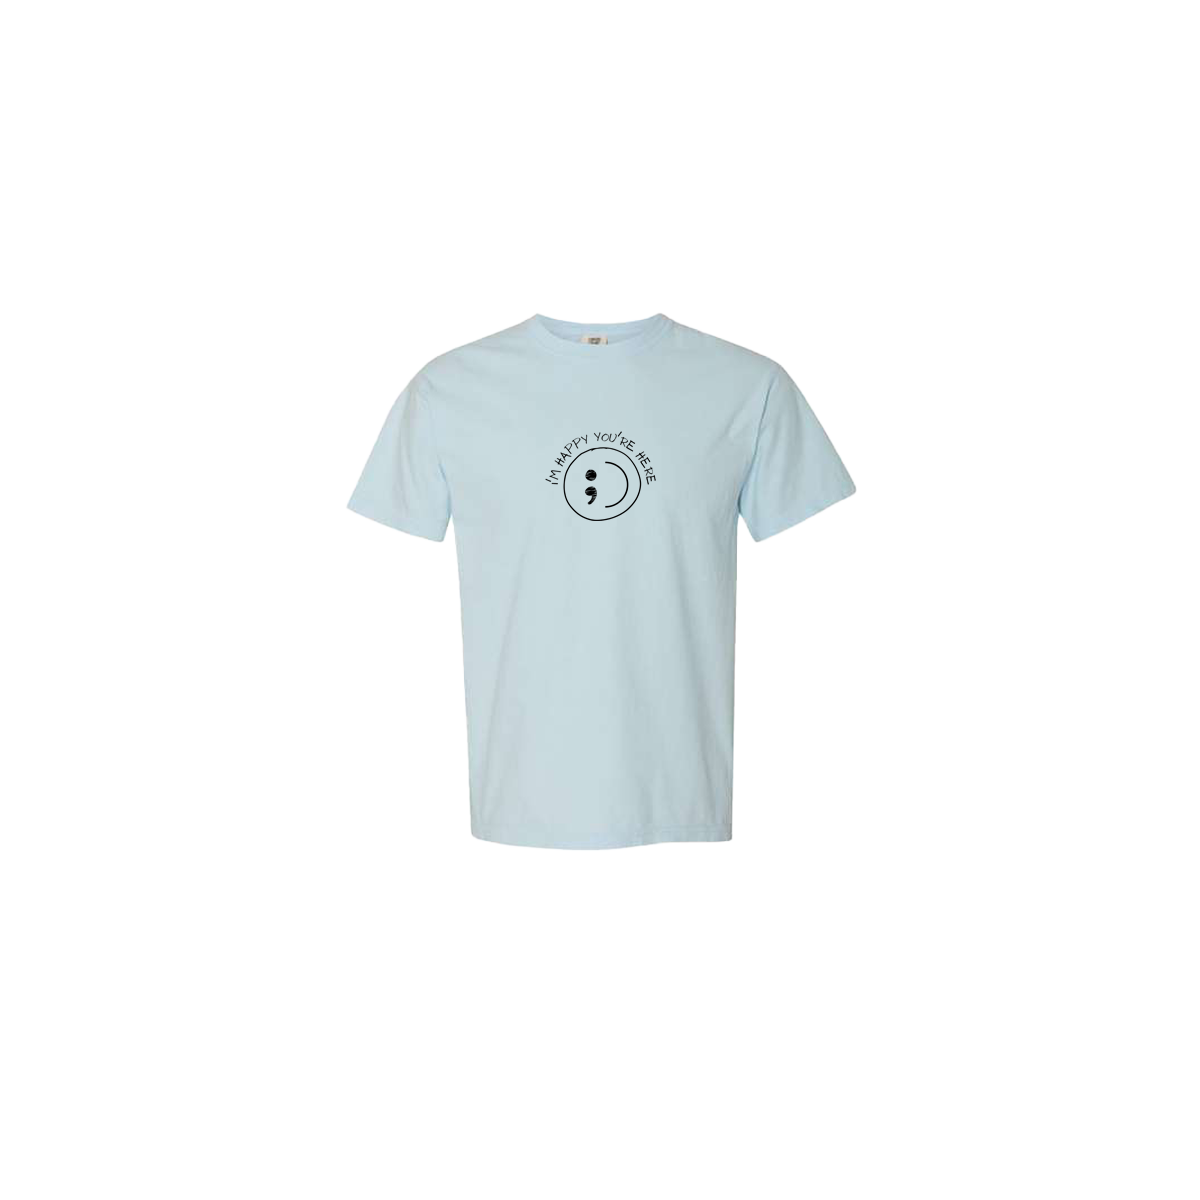 I'm Happy You're Here Embroidered Light Blue Tshirt - Mental Health Awareness Clothing